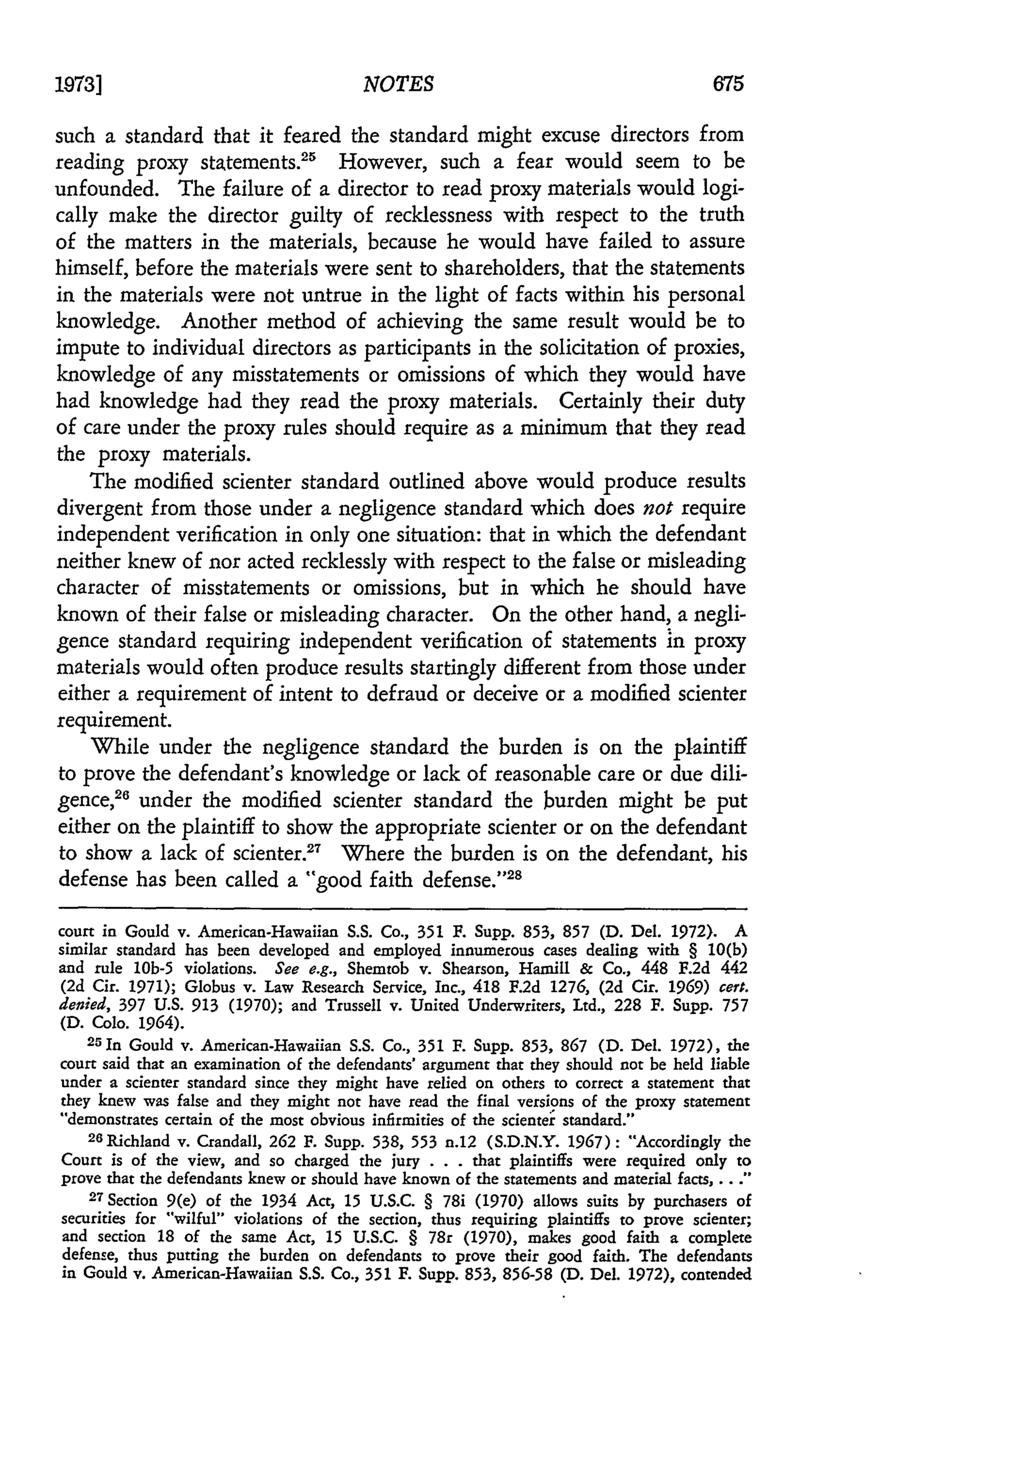 1973] NOTES such a standard that it feared the standard might excuse directors from reading proxy statements." However, such a fear would seem to be unfounded.